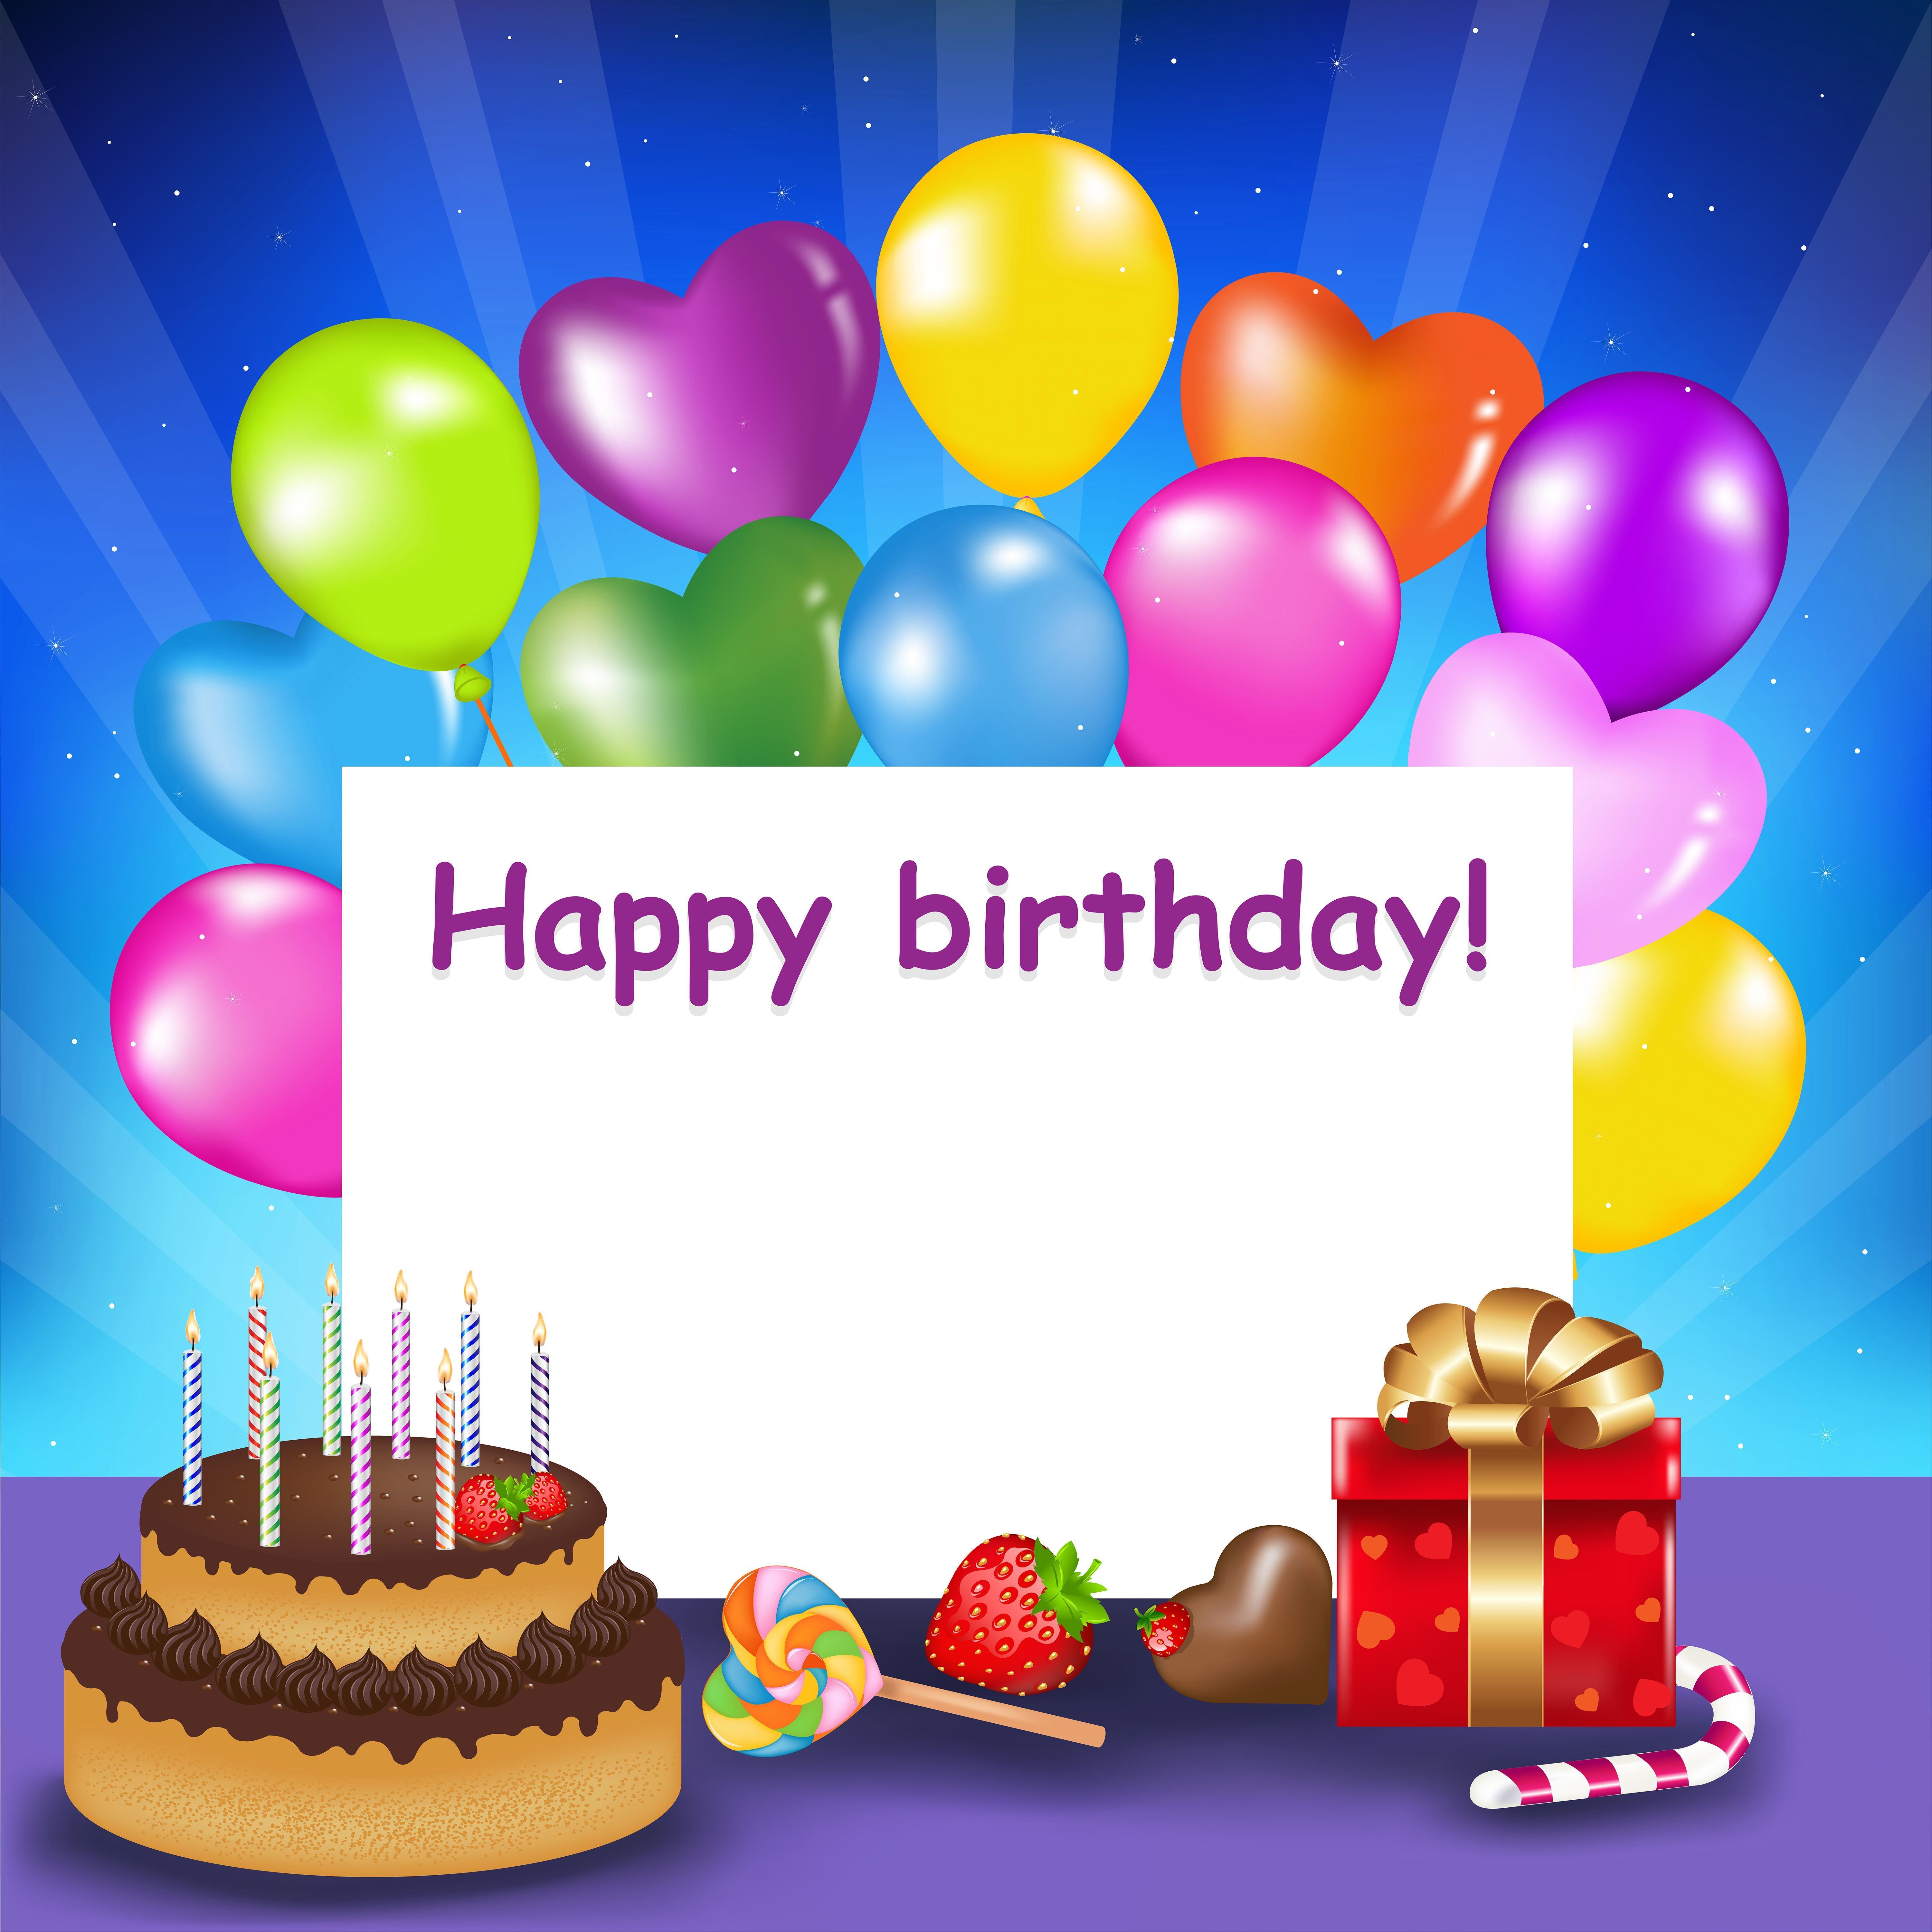 Birthday card with a cake, candies, gift box and balloons - Birthday